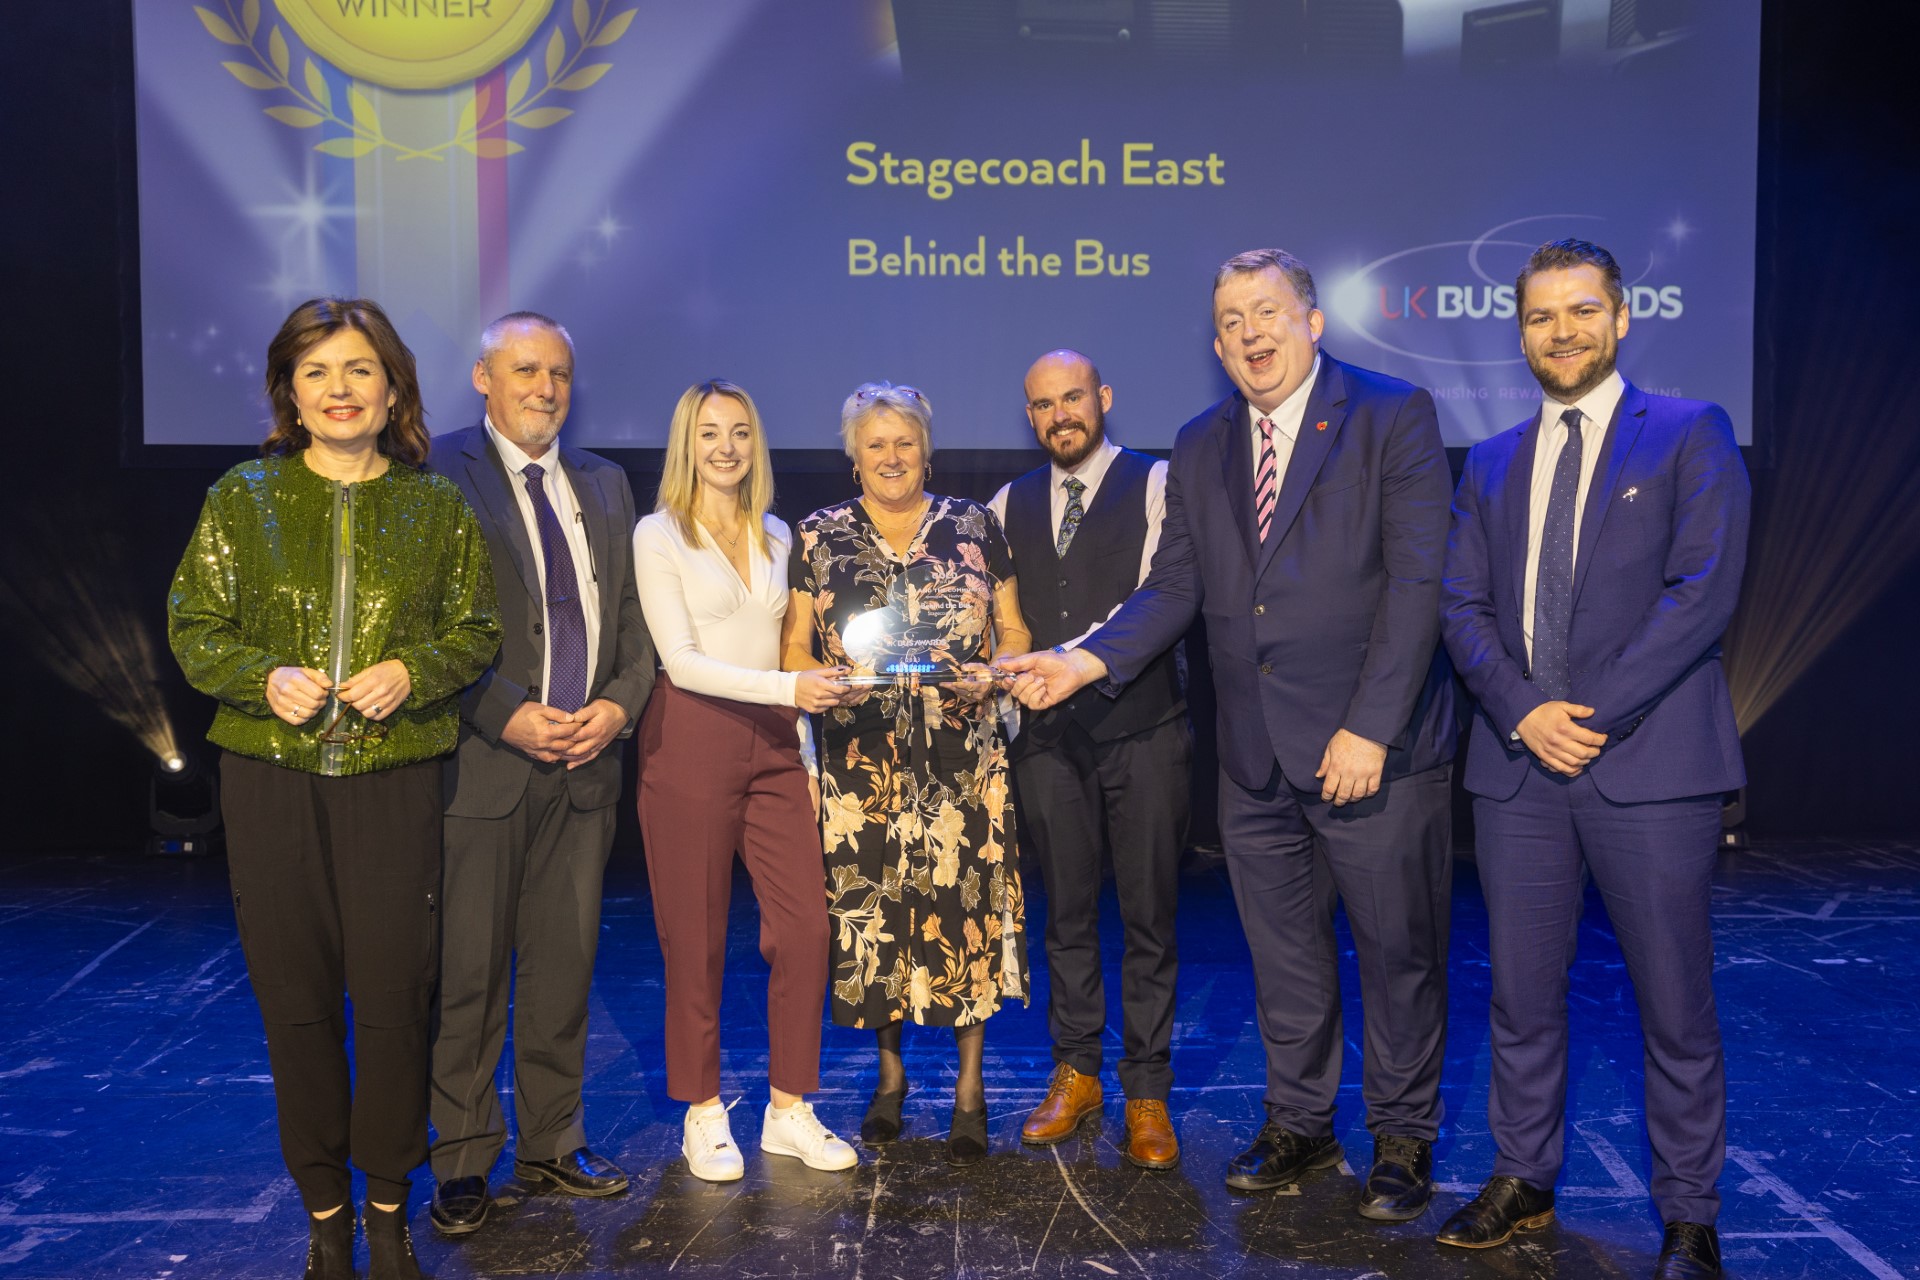 Stagecoach East wins gold at UK Bus Awards